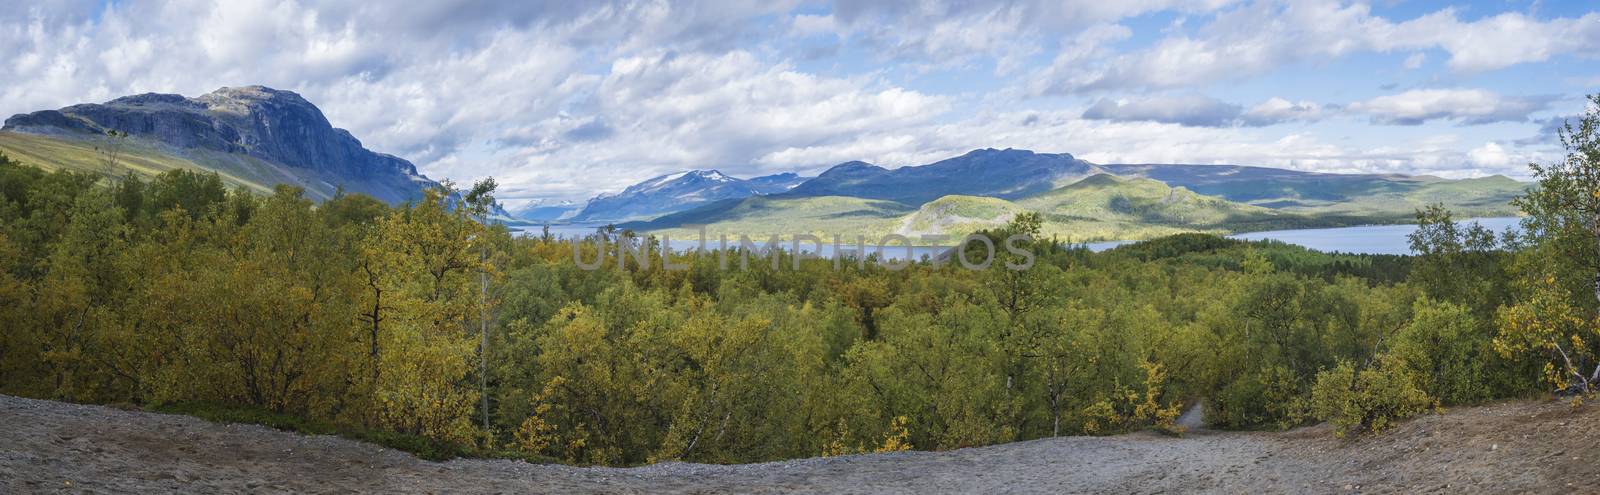 Panoramic landscape with beautiful river Lulealven, snow capped mountain and yellow birch tree. Kungsleden hiking trail near Saltoluokta, north of Sweden, Lapland wild nature. Early autumn blue sky.